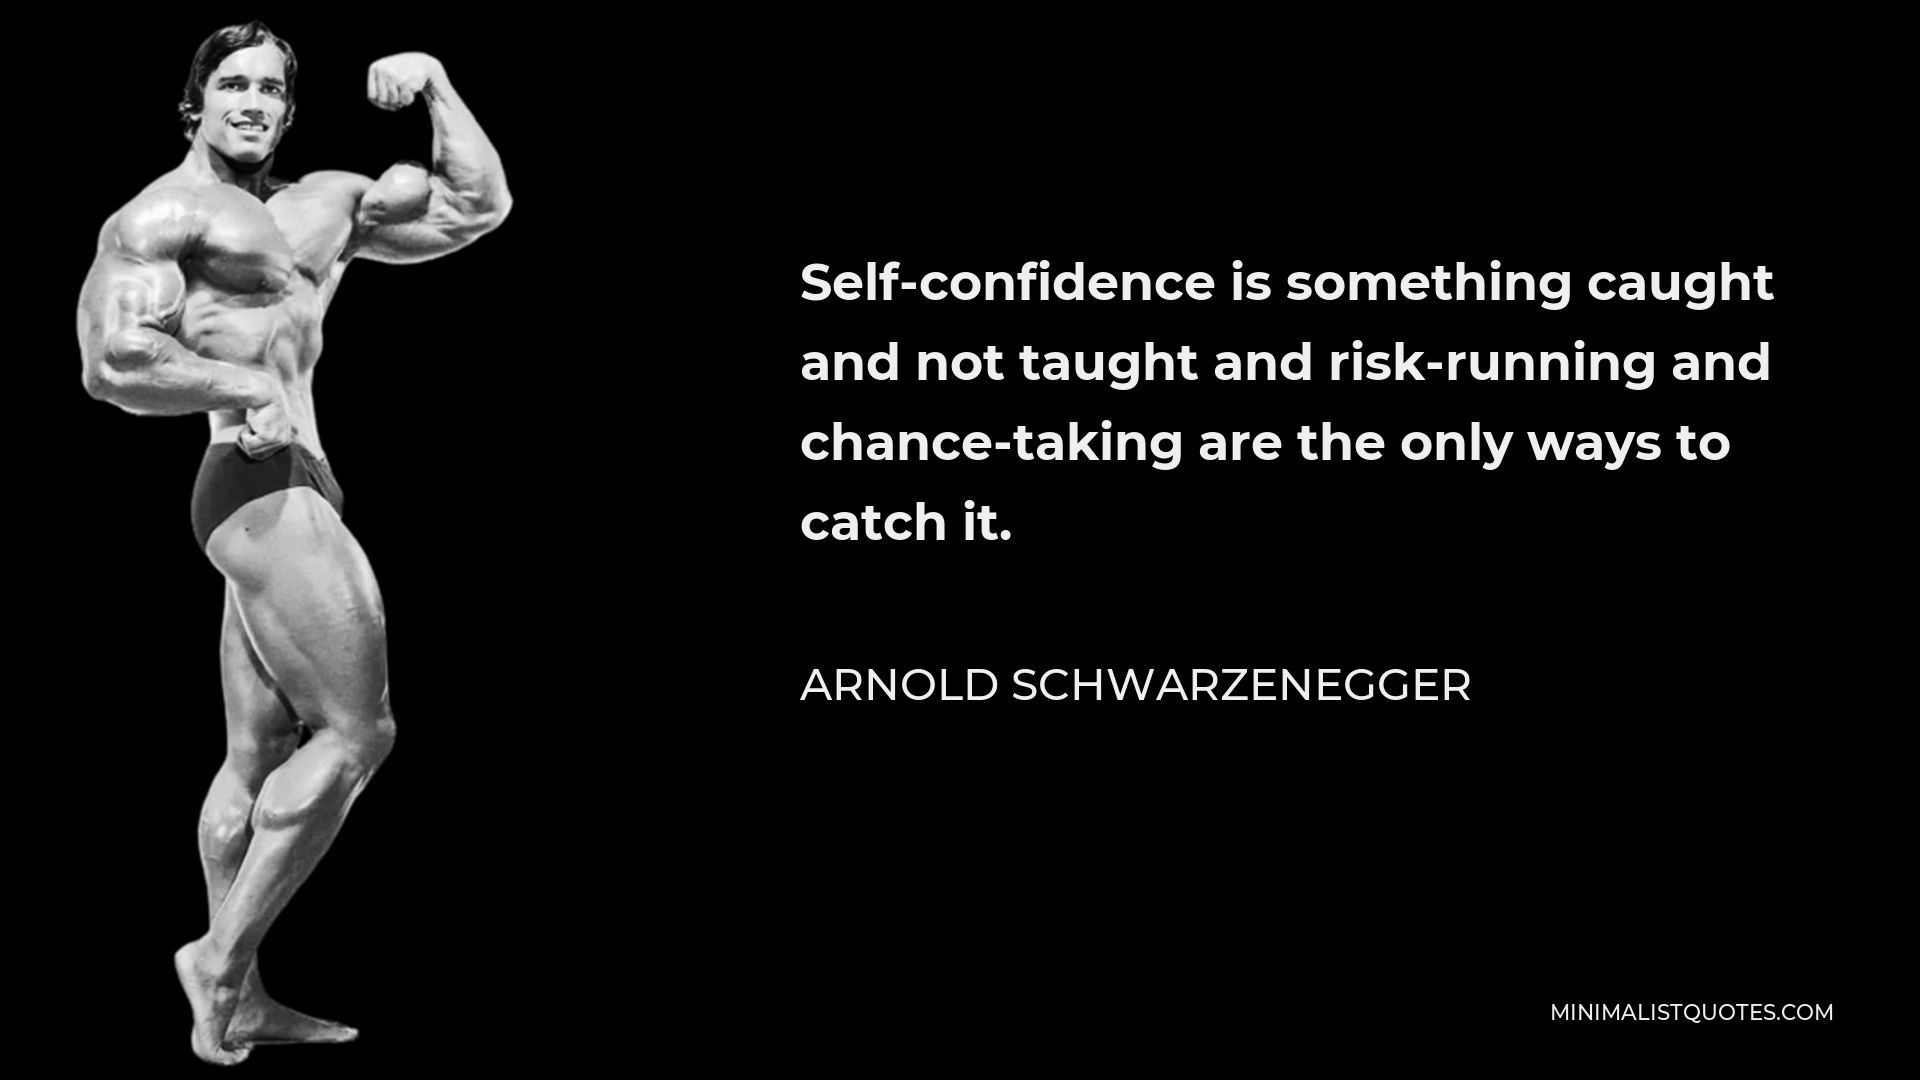 Arnold Schwarzenegger Quote - Self-confidence is something caught and not taught and risk-running and chance-taking are the only ways to catch it.